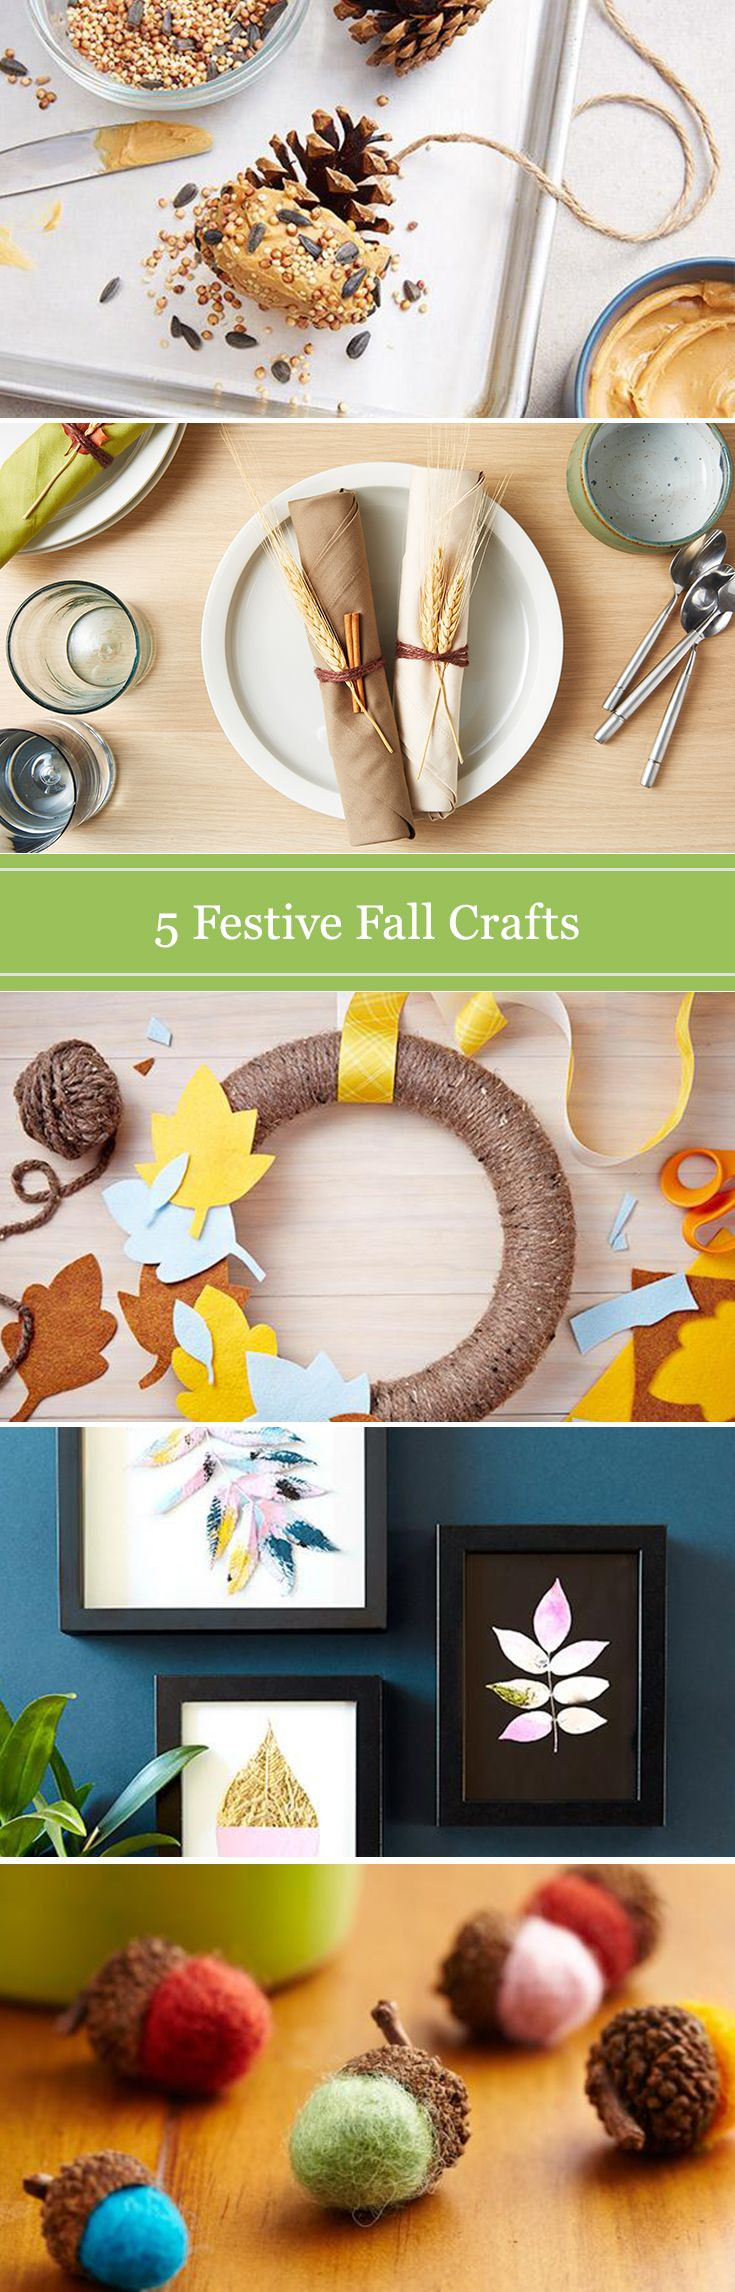 Home Craft Ideas For Adults
 51 best Craft Ideas for Adults images on Pinterest